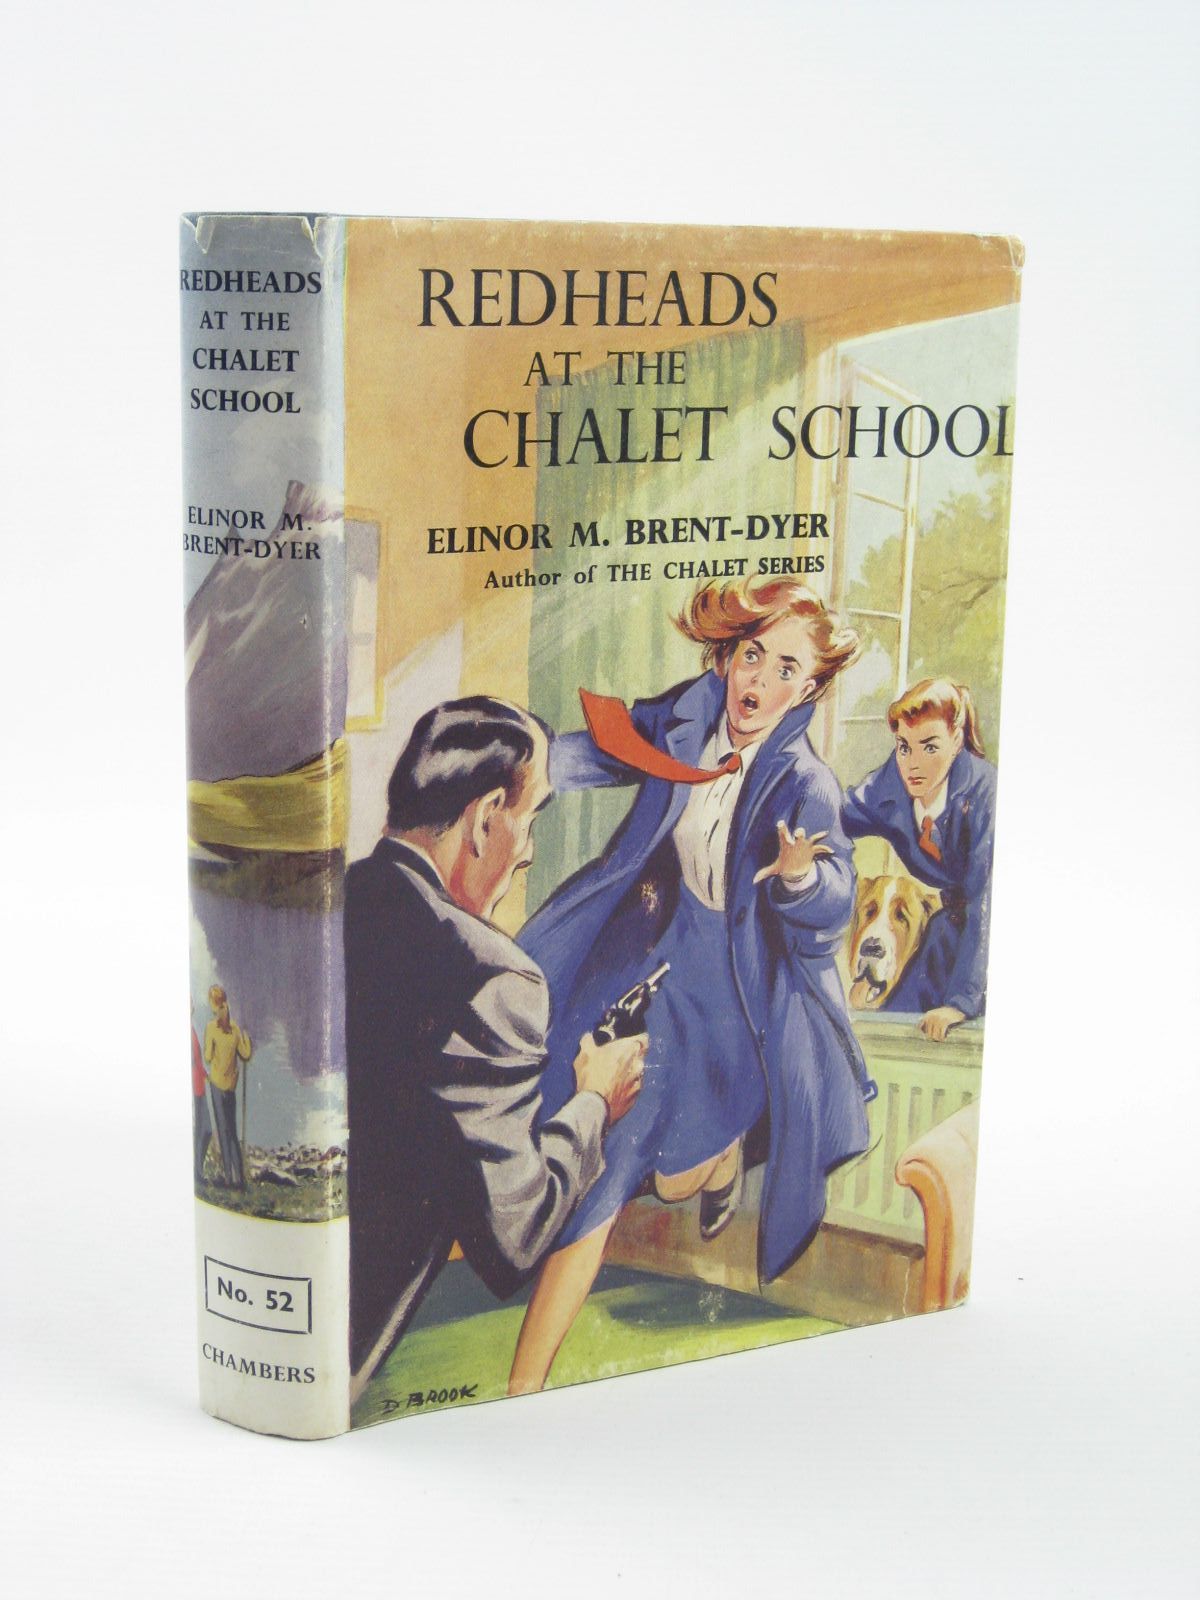 Cover of REDHEADS AT THE CHALET SCHOOL by Elinor M. Brent-Dyer